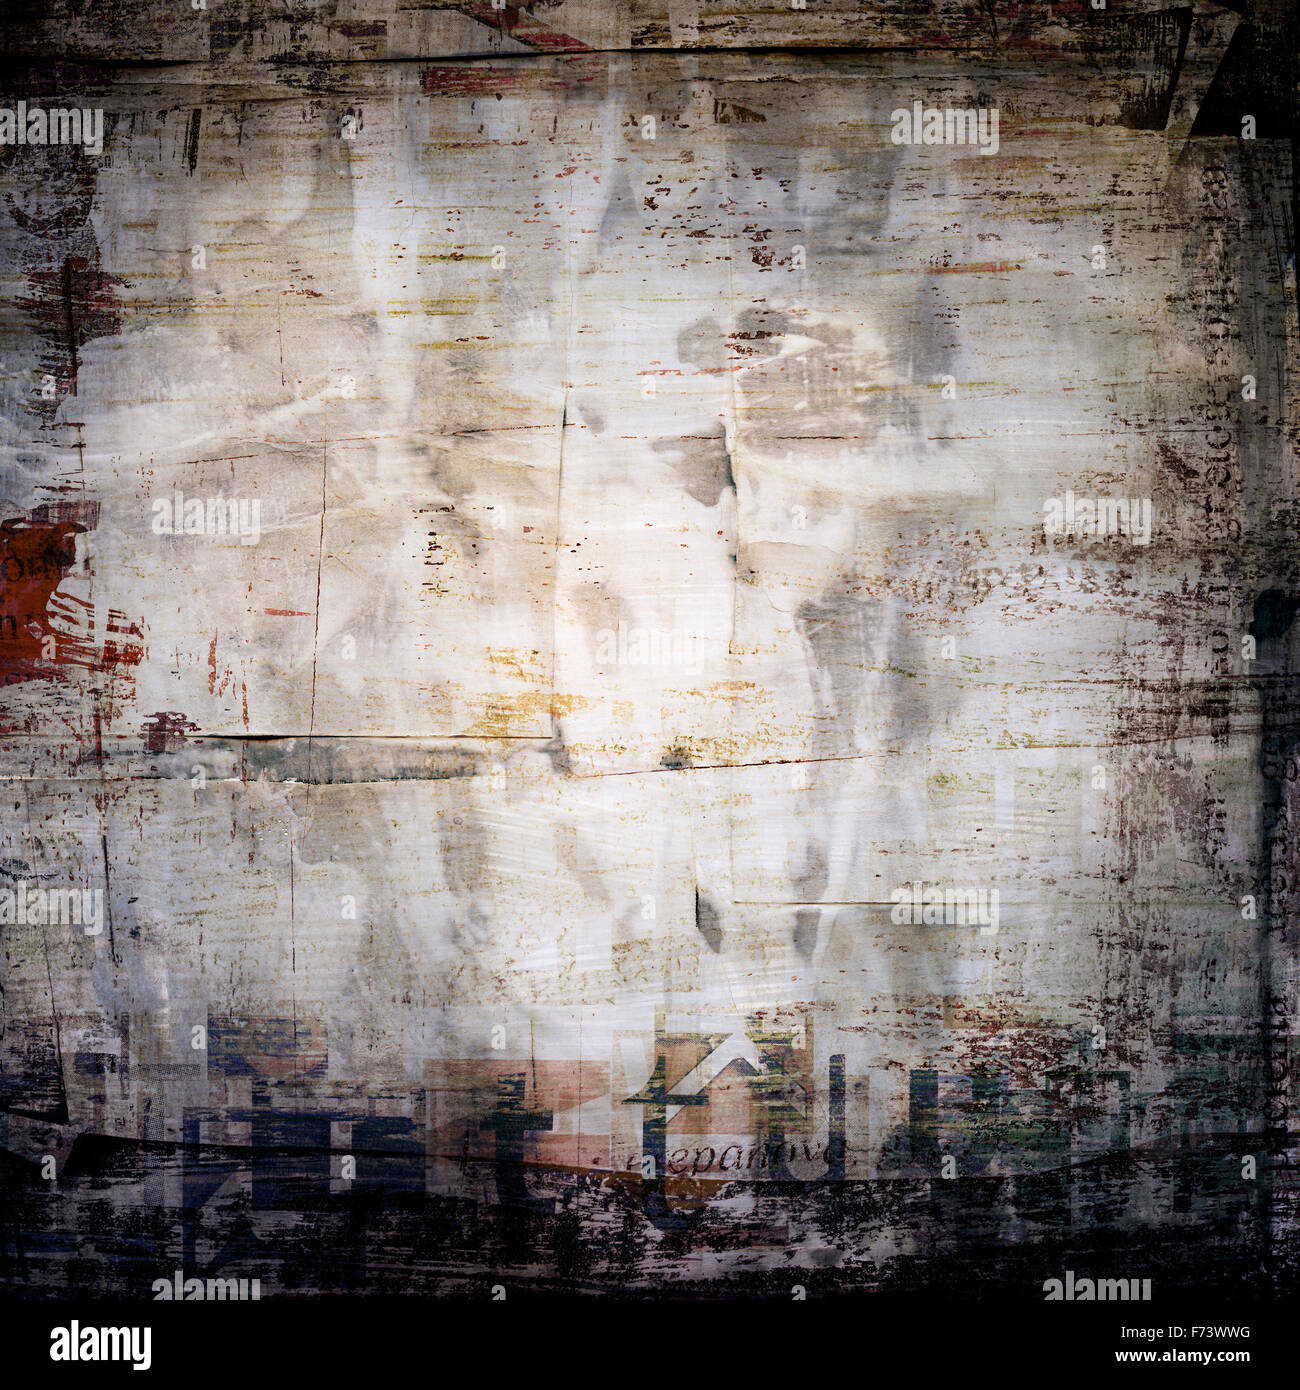 Grunge painted torn paper collage, cracked scratched background with letters Stock Photo